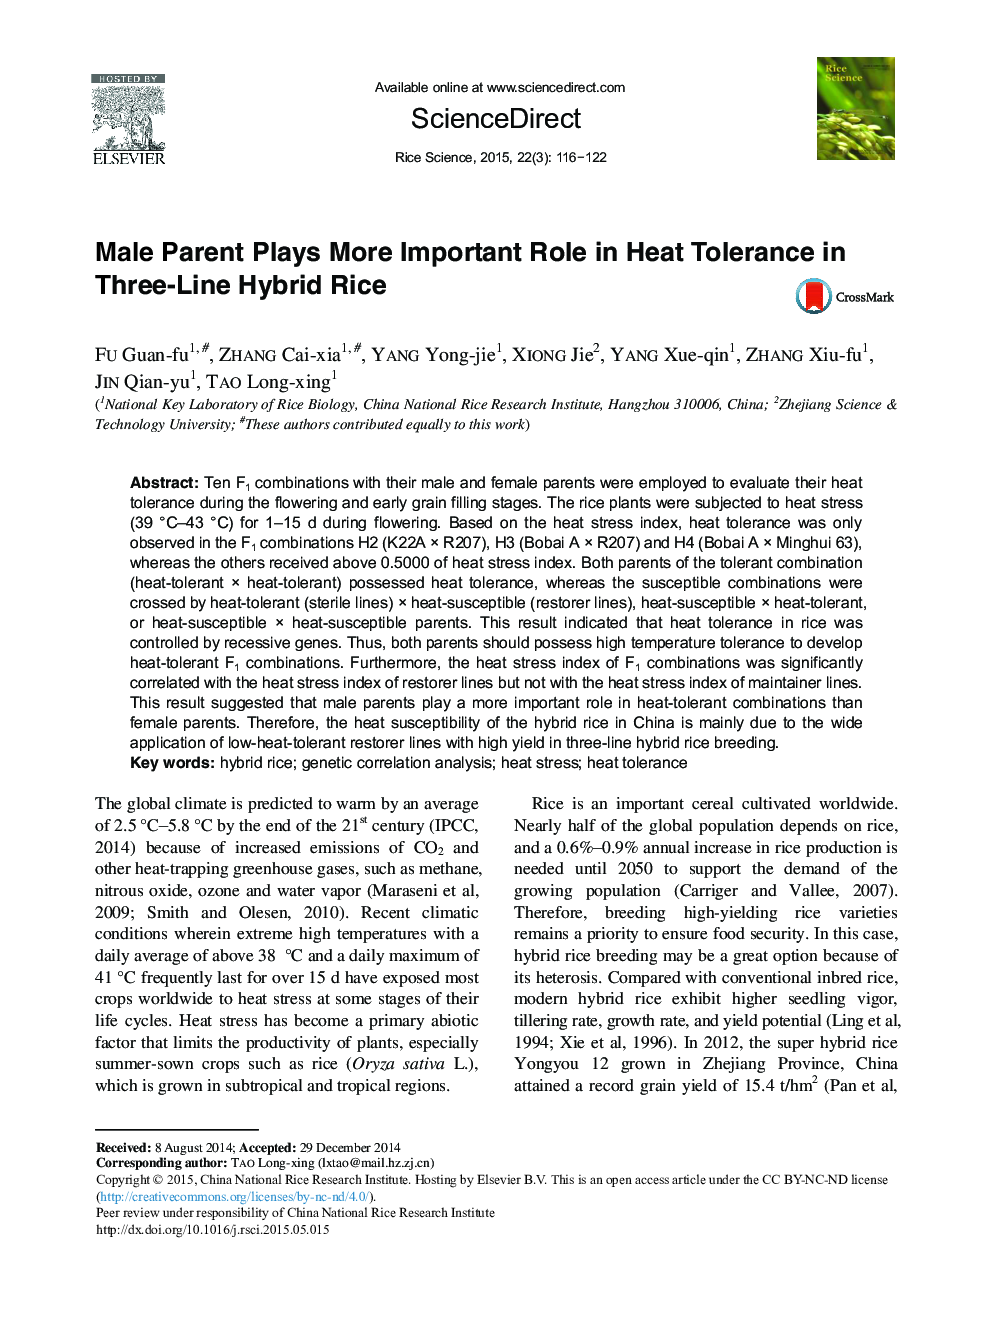 Male Parent Plays More Important Role in Heat Tolerance in Three-Line Hybrid Rice 